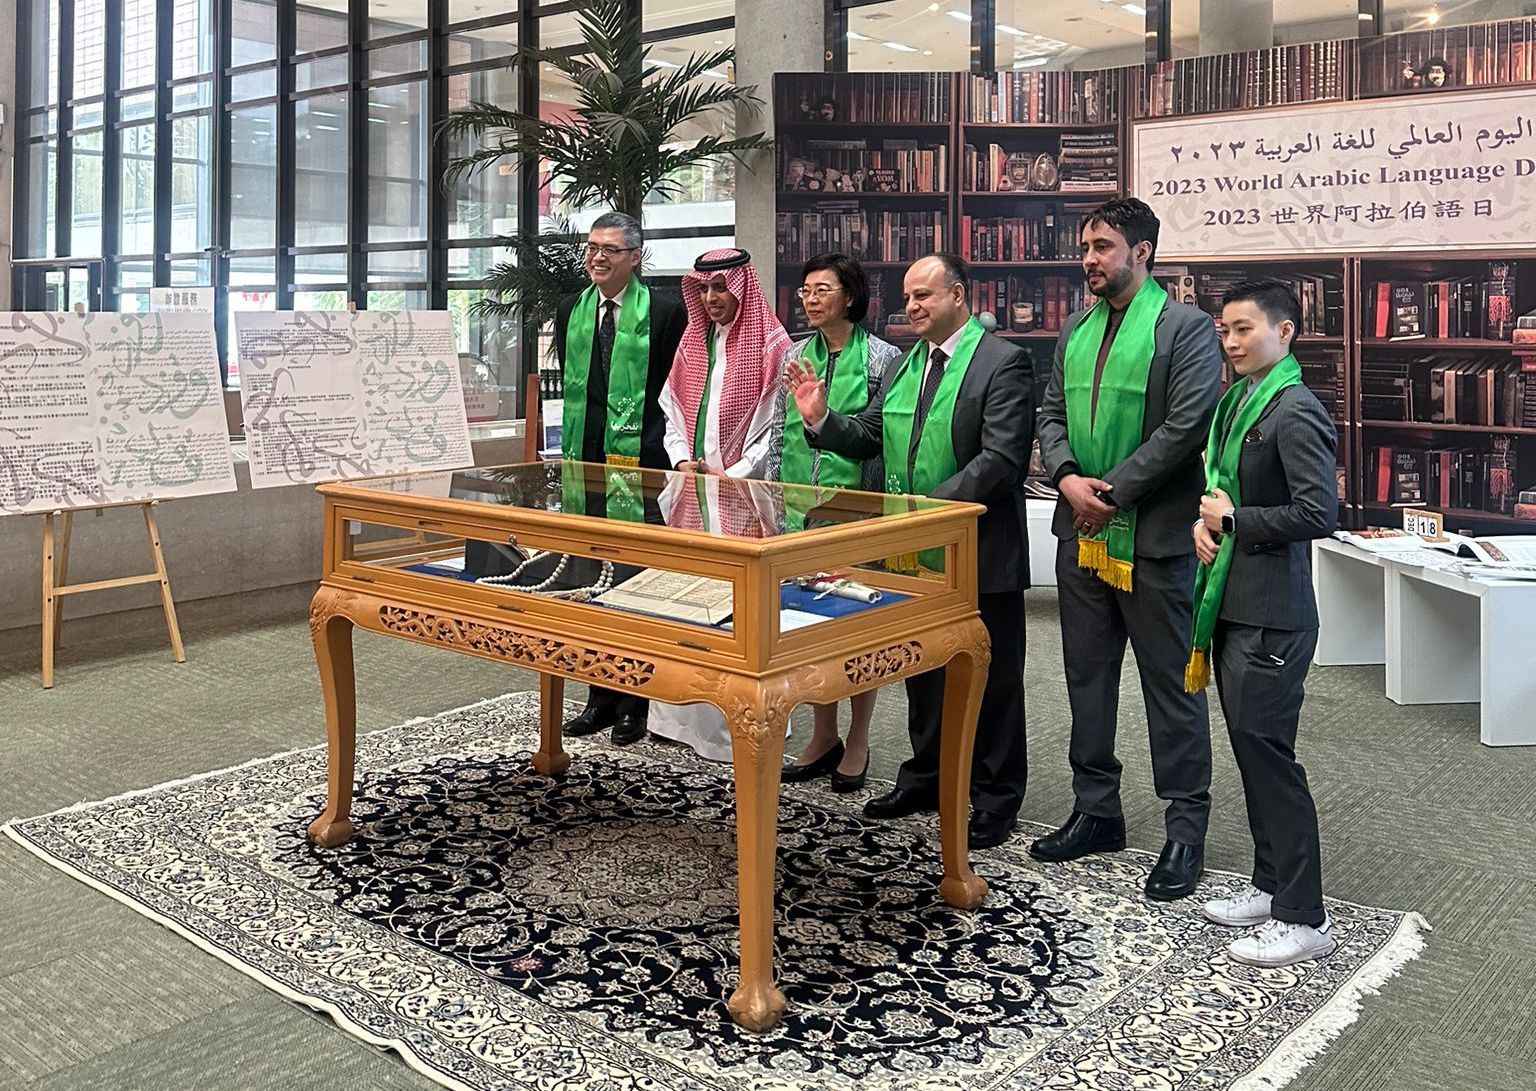 National Central Library holds an exhibition on Arabic language.